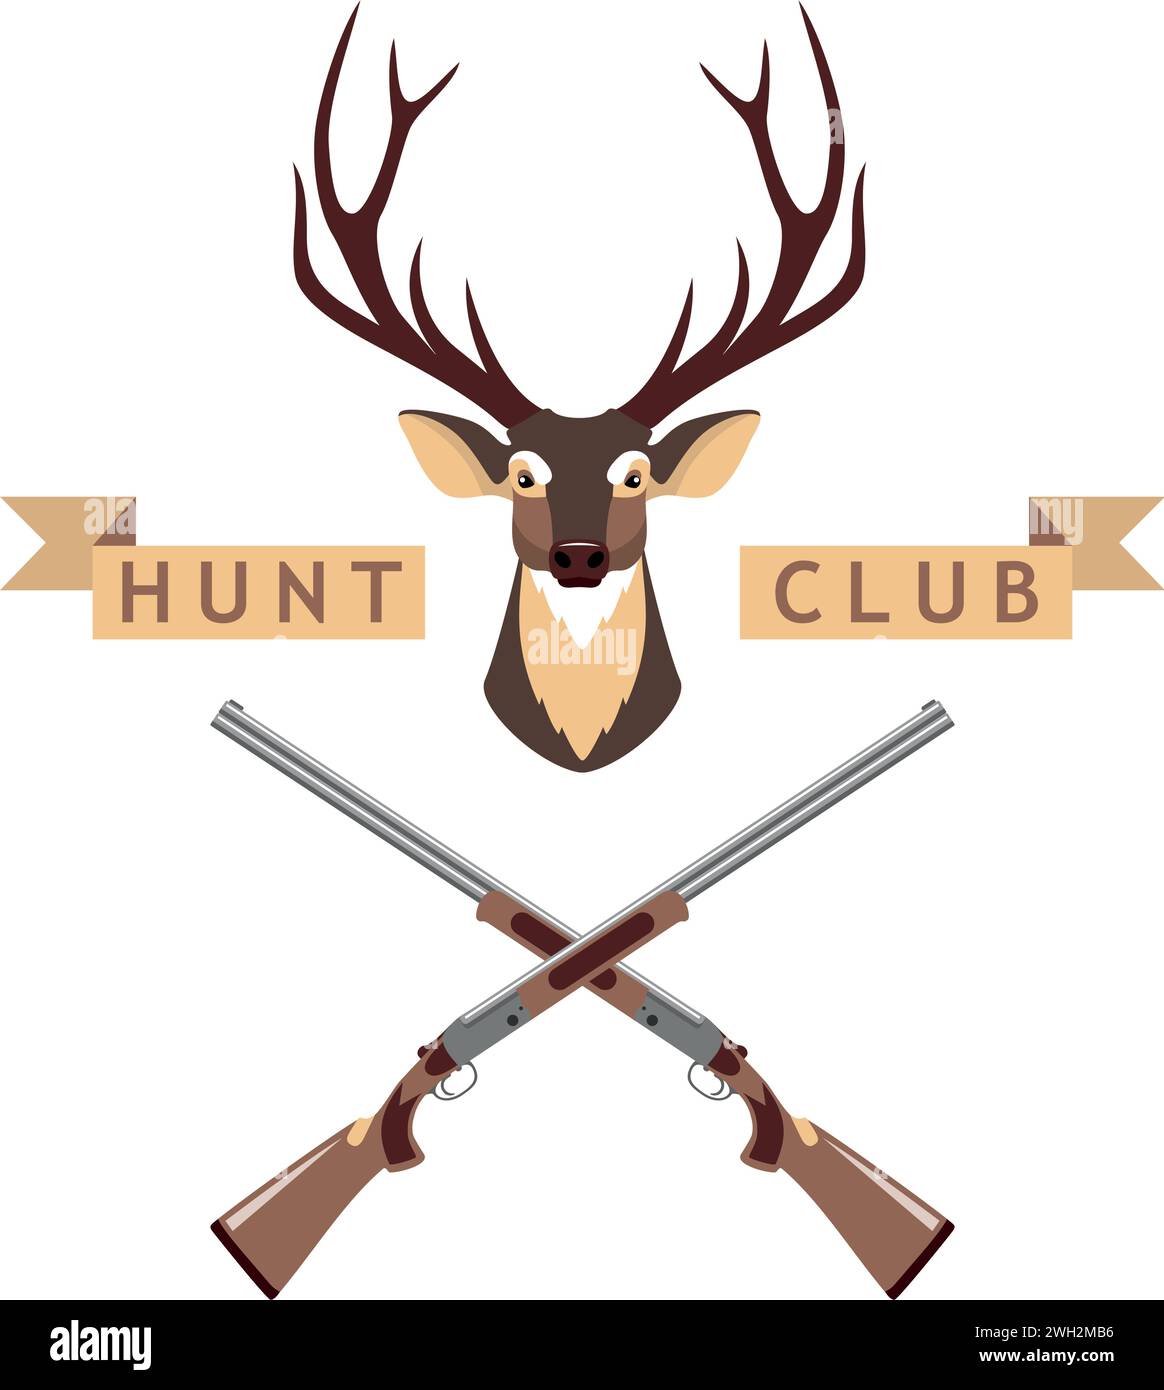 Hunt club Cut Out Stock Images & Pictures - Alamy